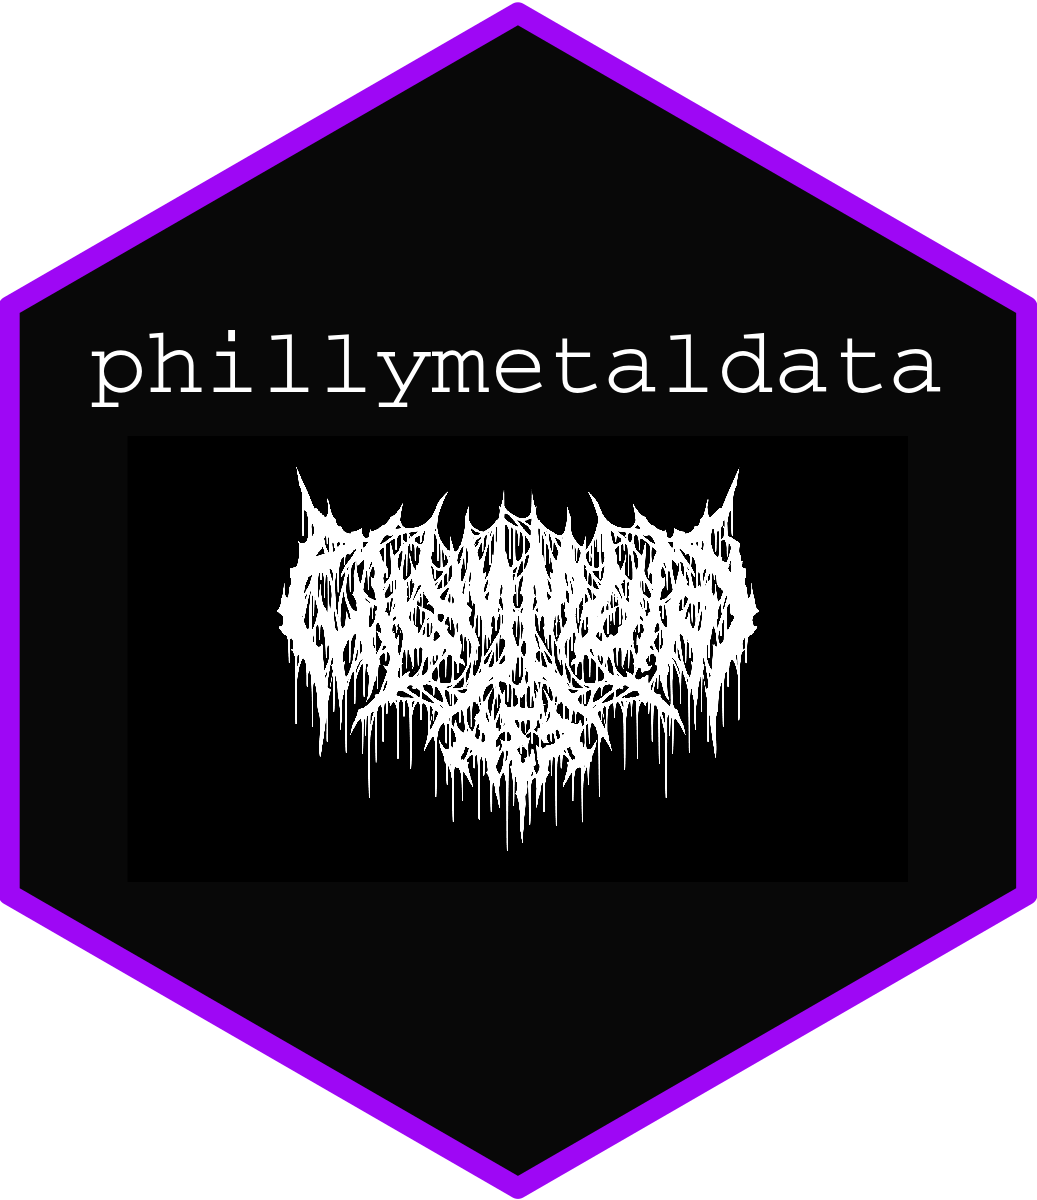 phillymetaldata hex image for R package